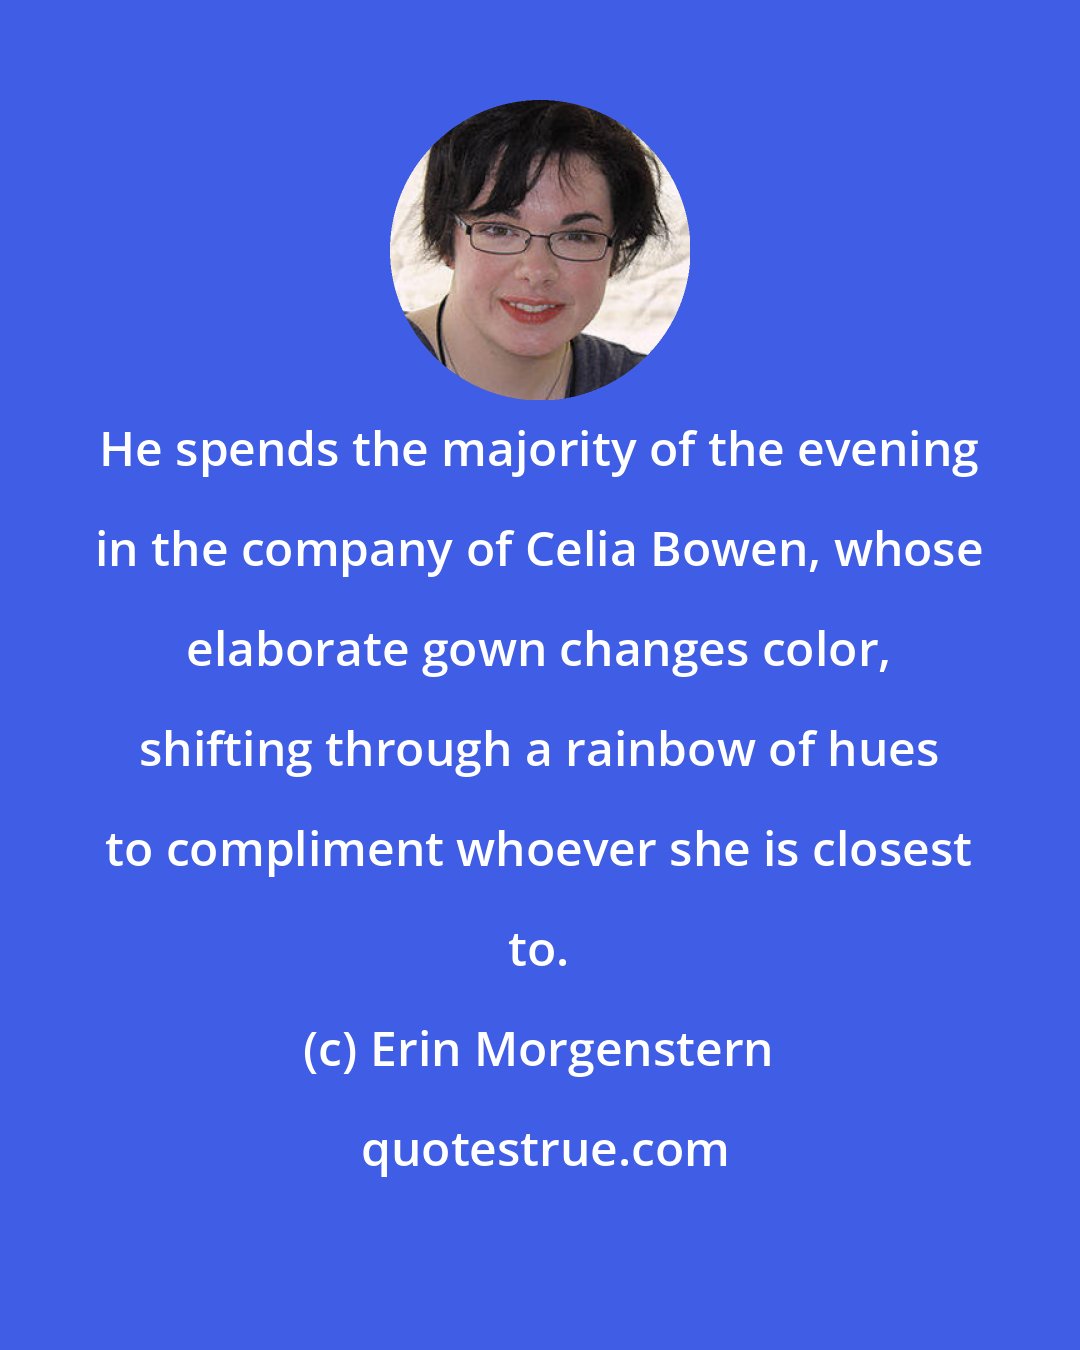 Erin Morgenstern: He spends the majority of the evening in the company of Celia Bowen, whose elaborate gown changes color, shifting through a rainbow of hues to compliment whoever she is closest to.